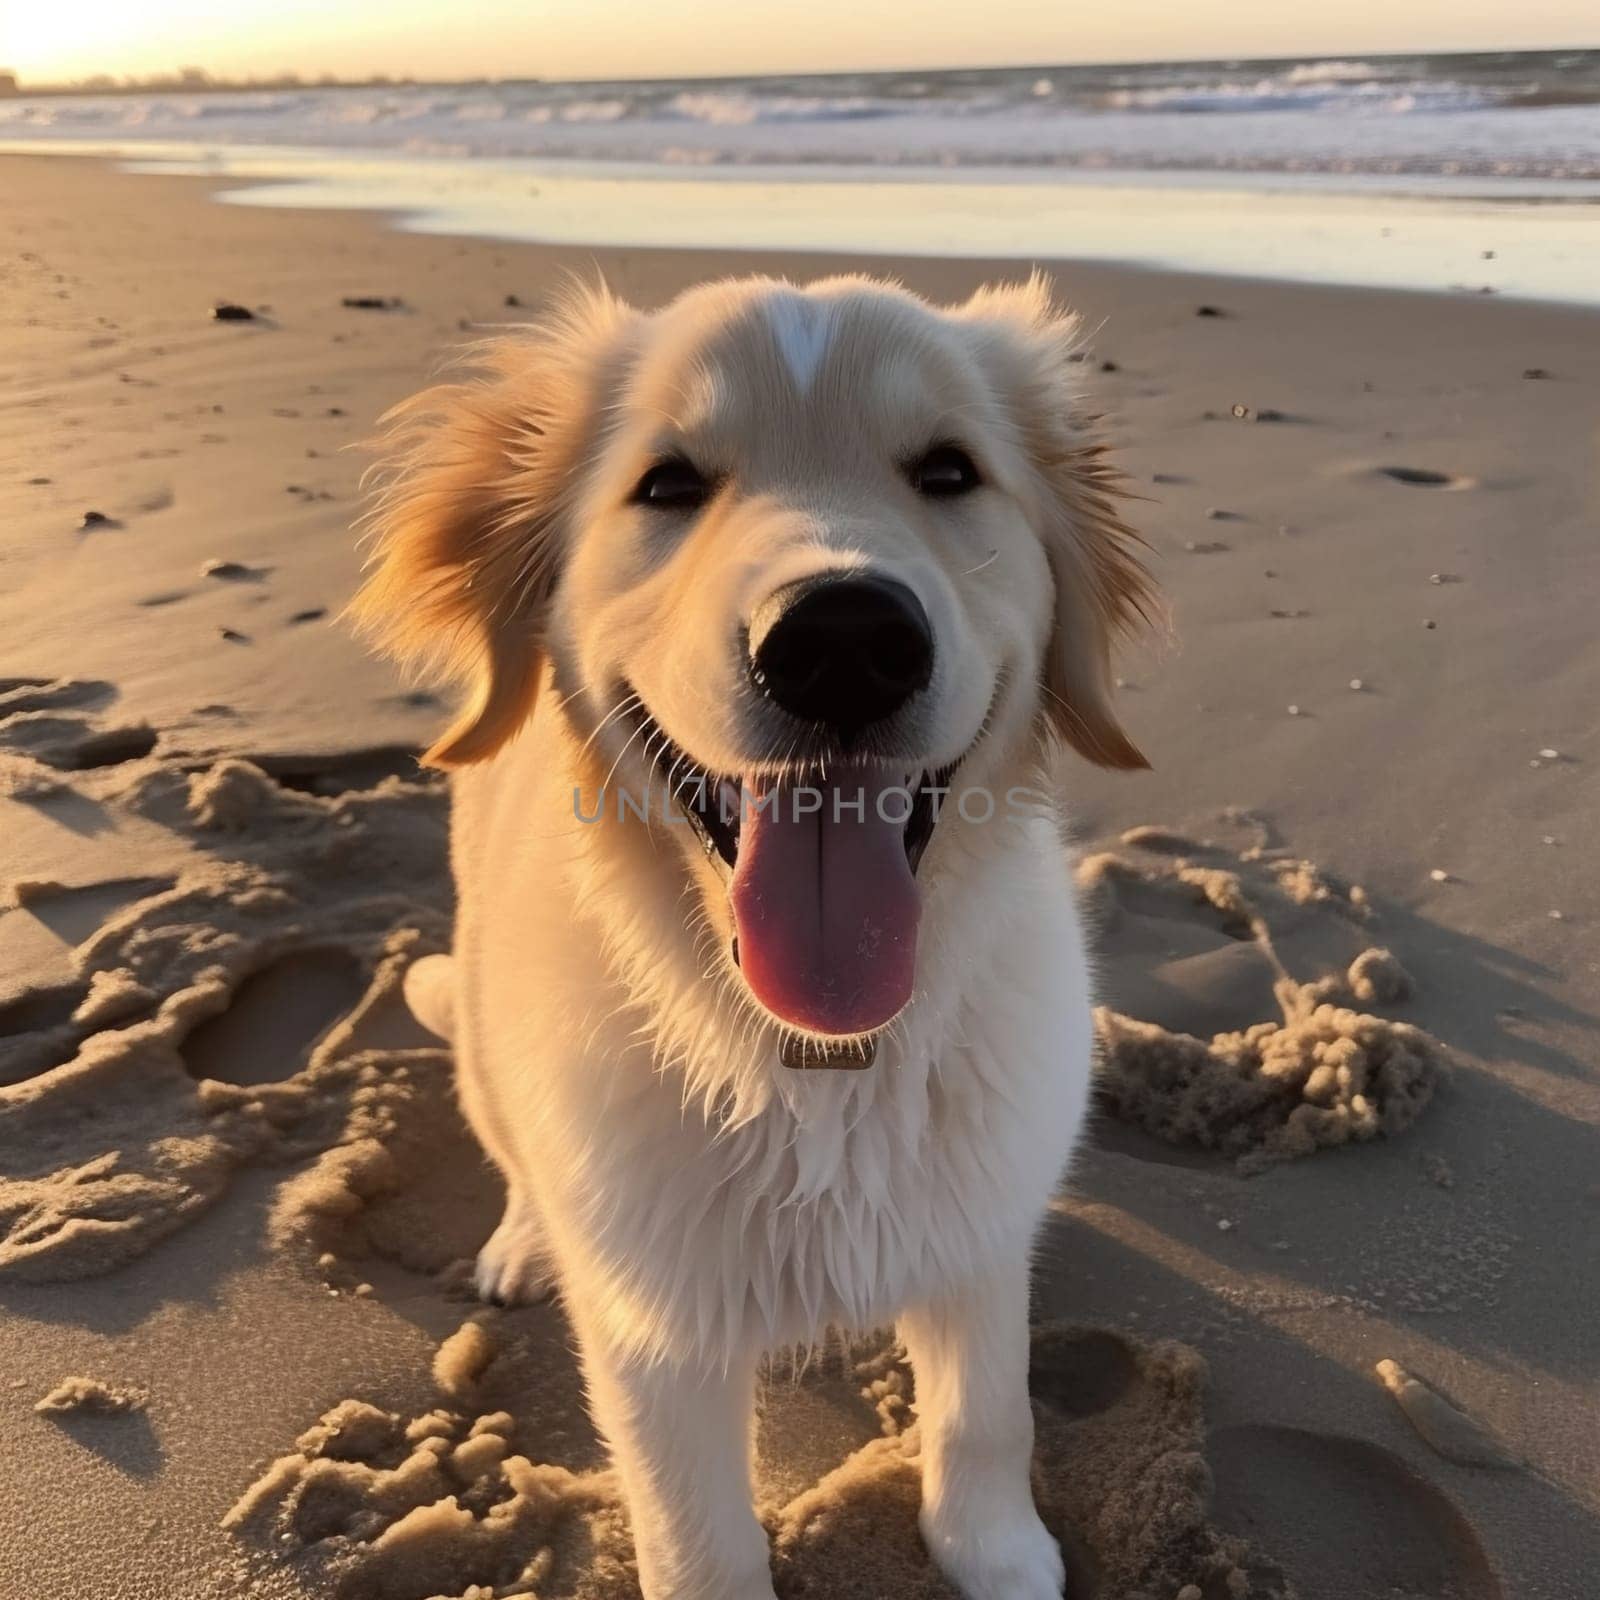 Golden retriever sitting on the sand beach Concept for the summer adventures of purebreed dog at the seaside vacation.